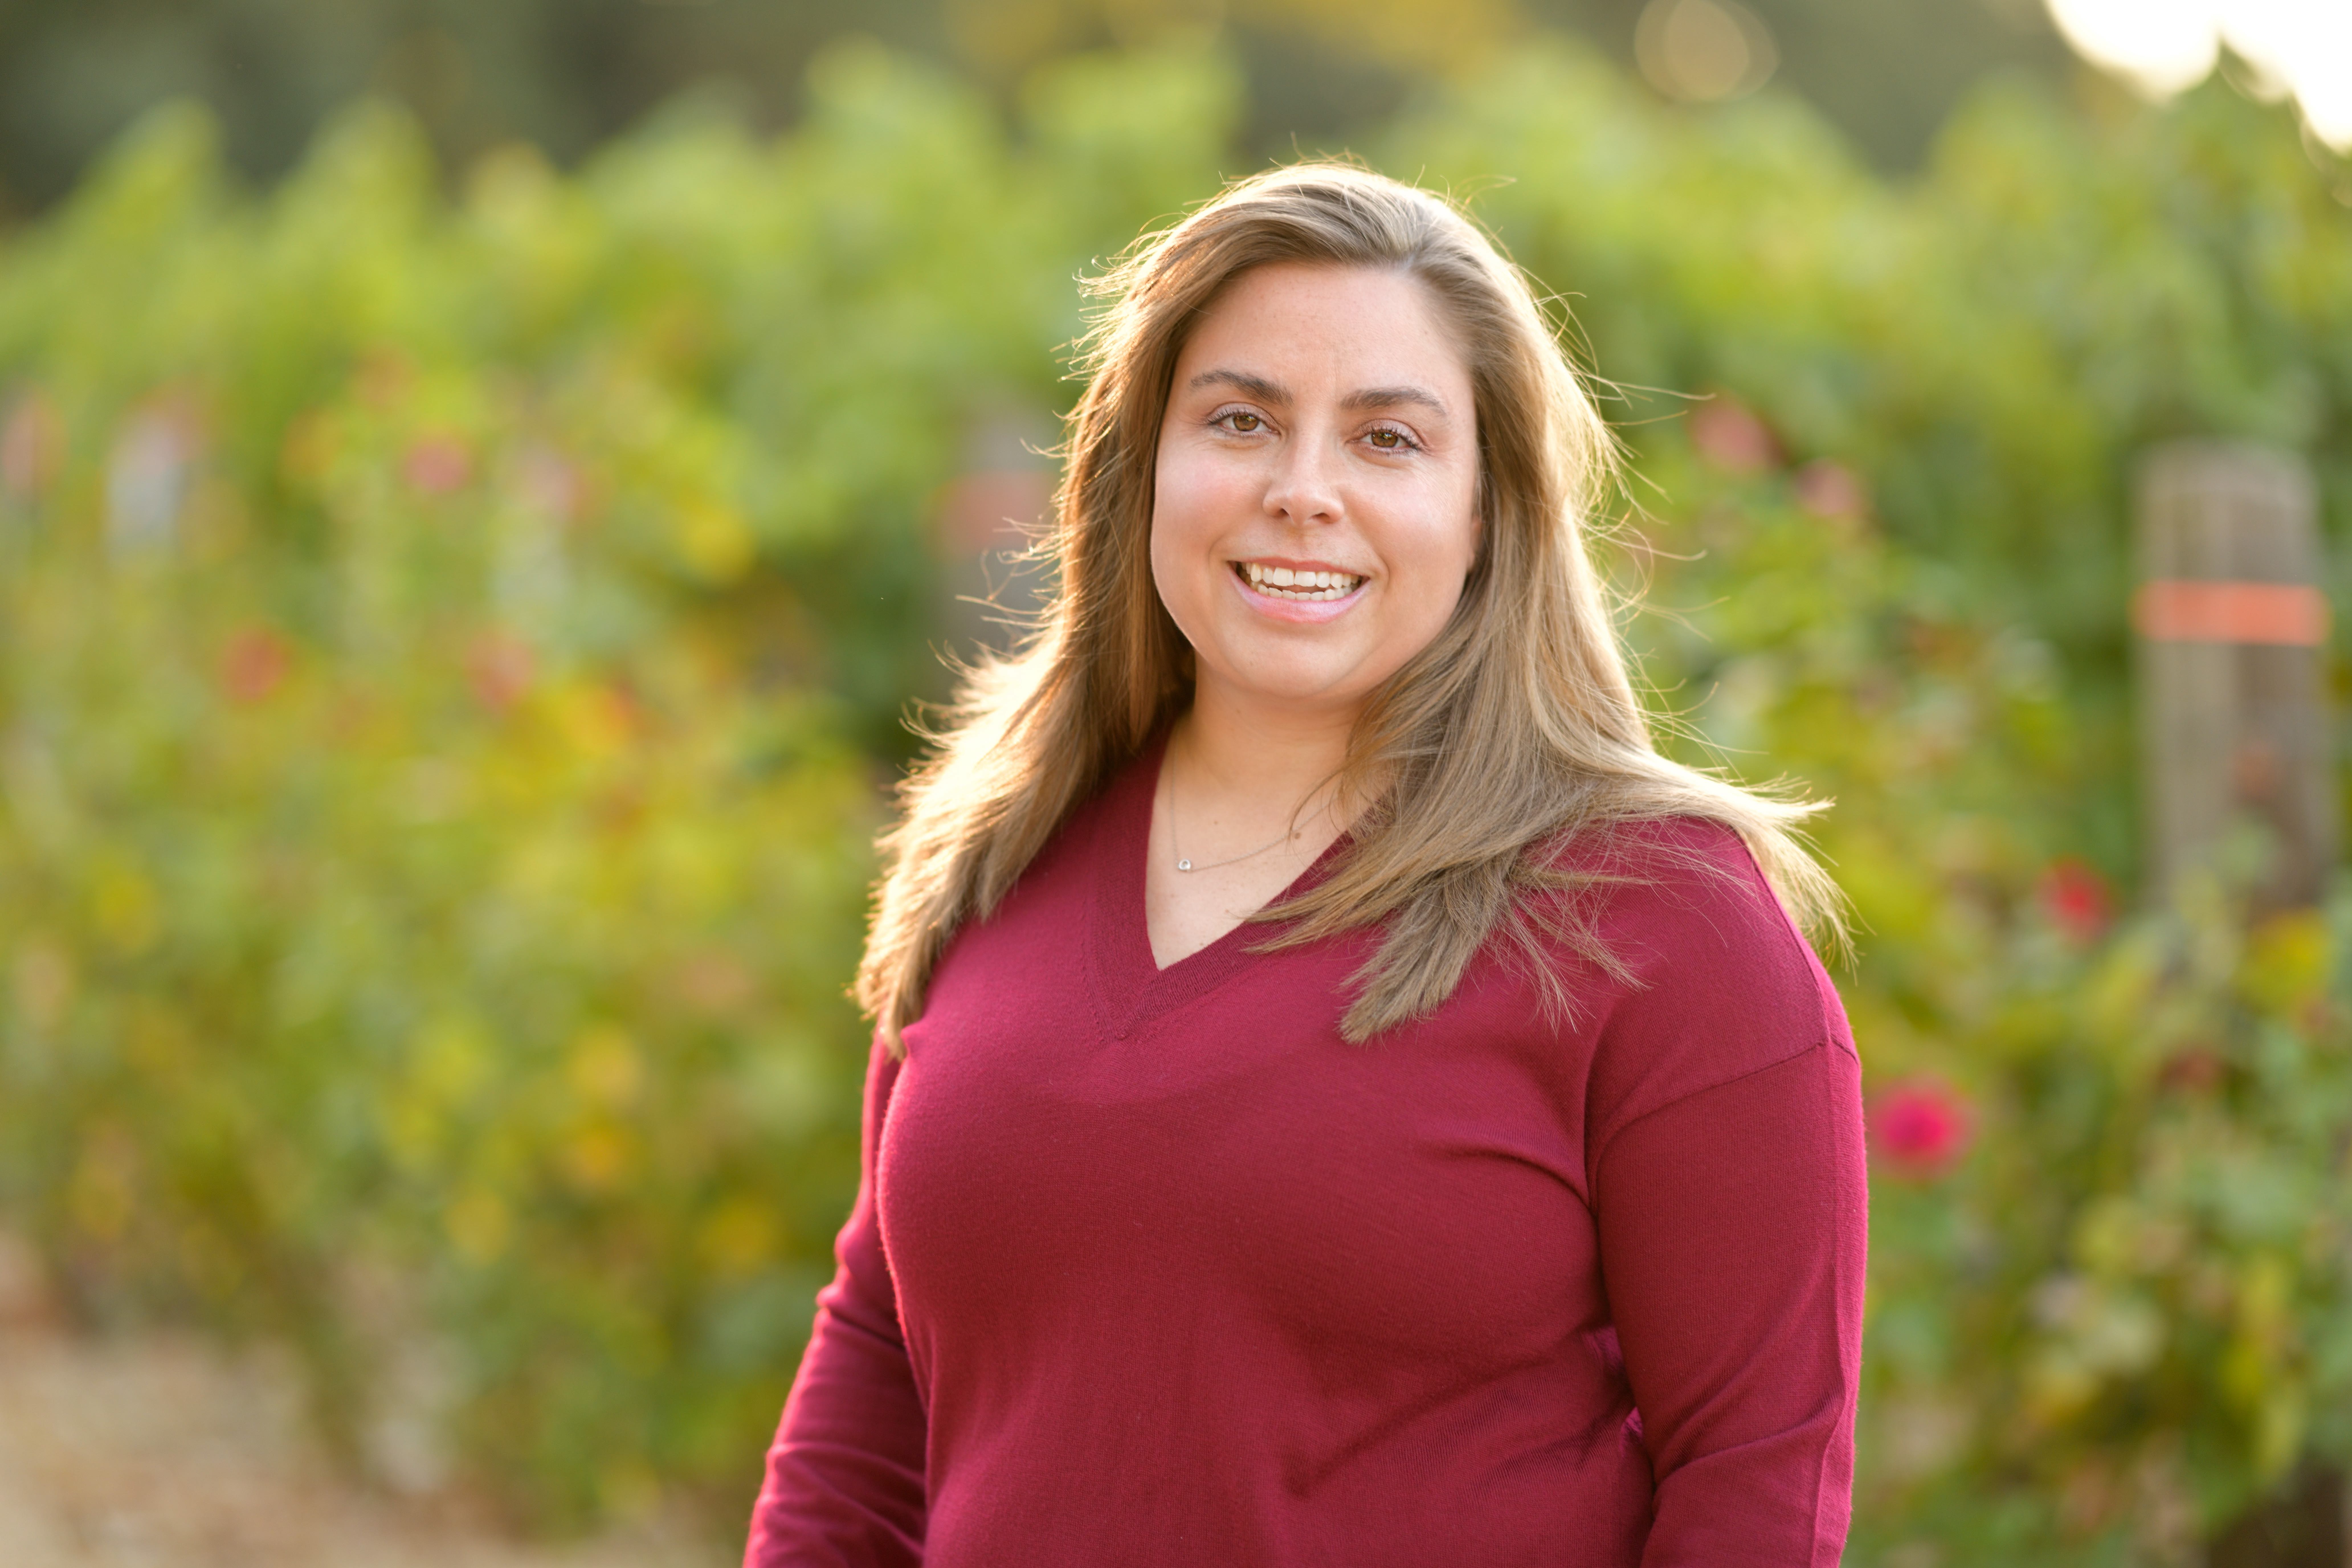 Angelina Mondavi is a member of the fourth generation of the winemaking family, and consulting winemaker for Flat Top Hills.